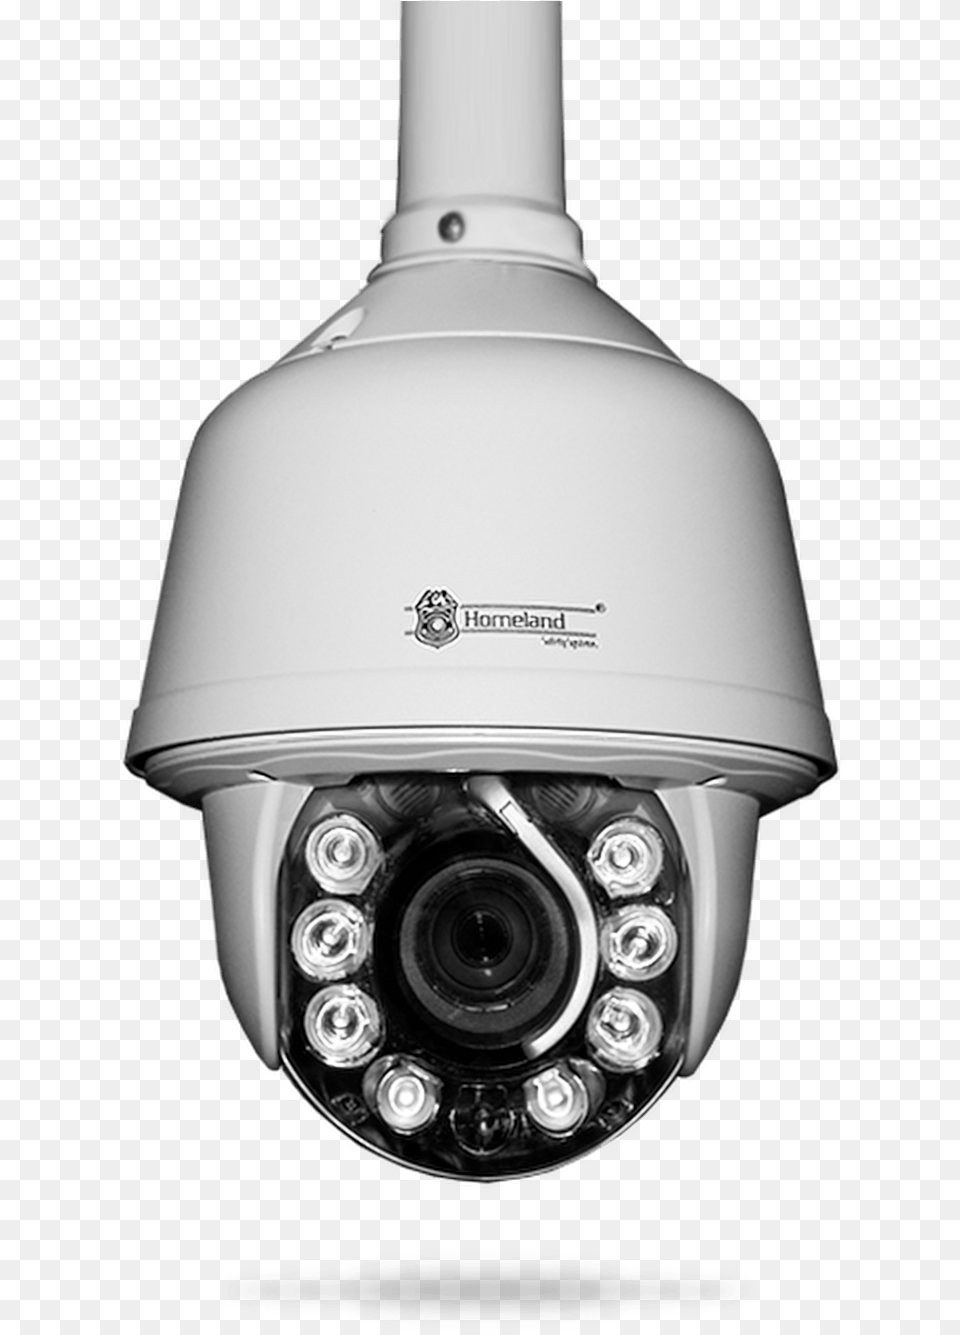 Homeland Safety Systems Inc Surveillance Camera, Lamp, Electronics Png Image